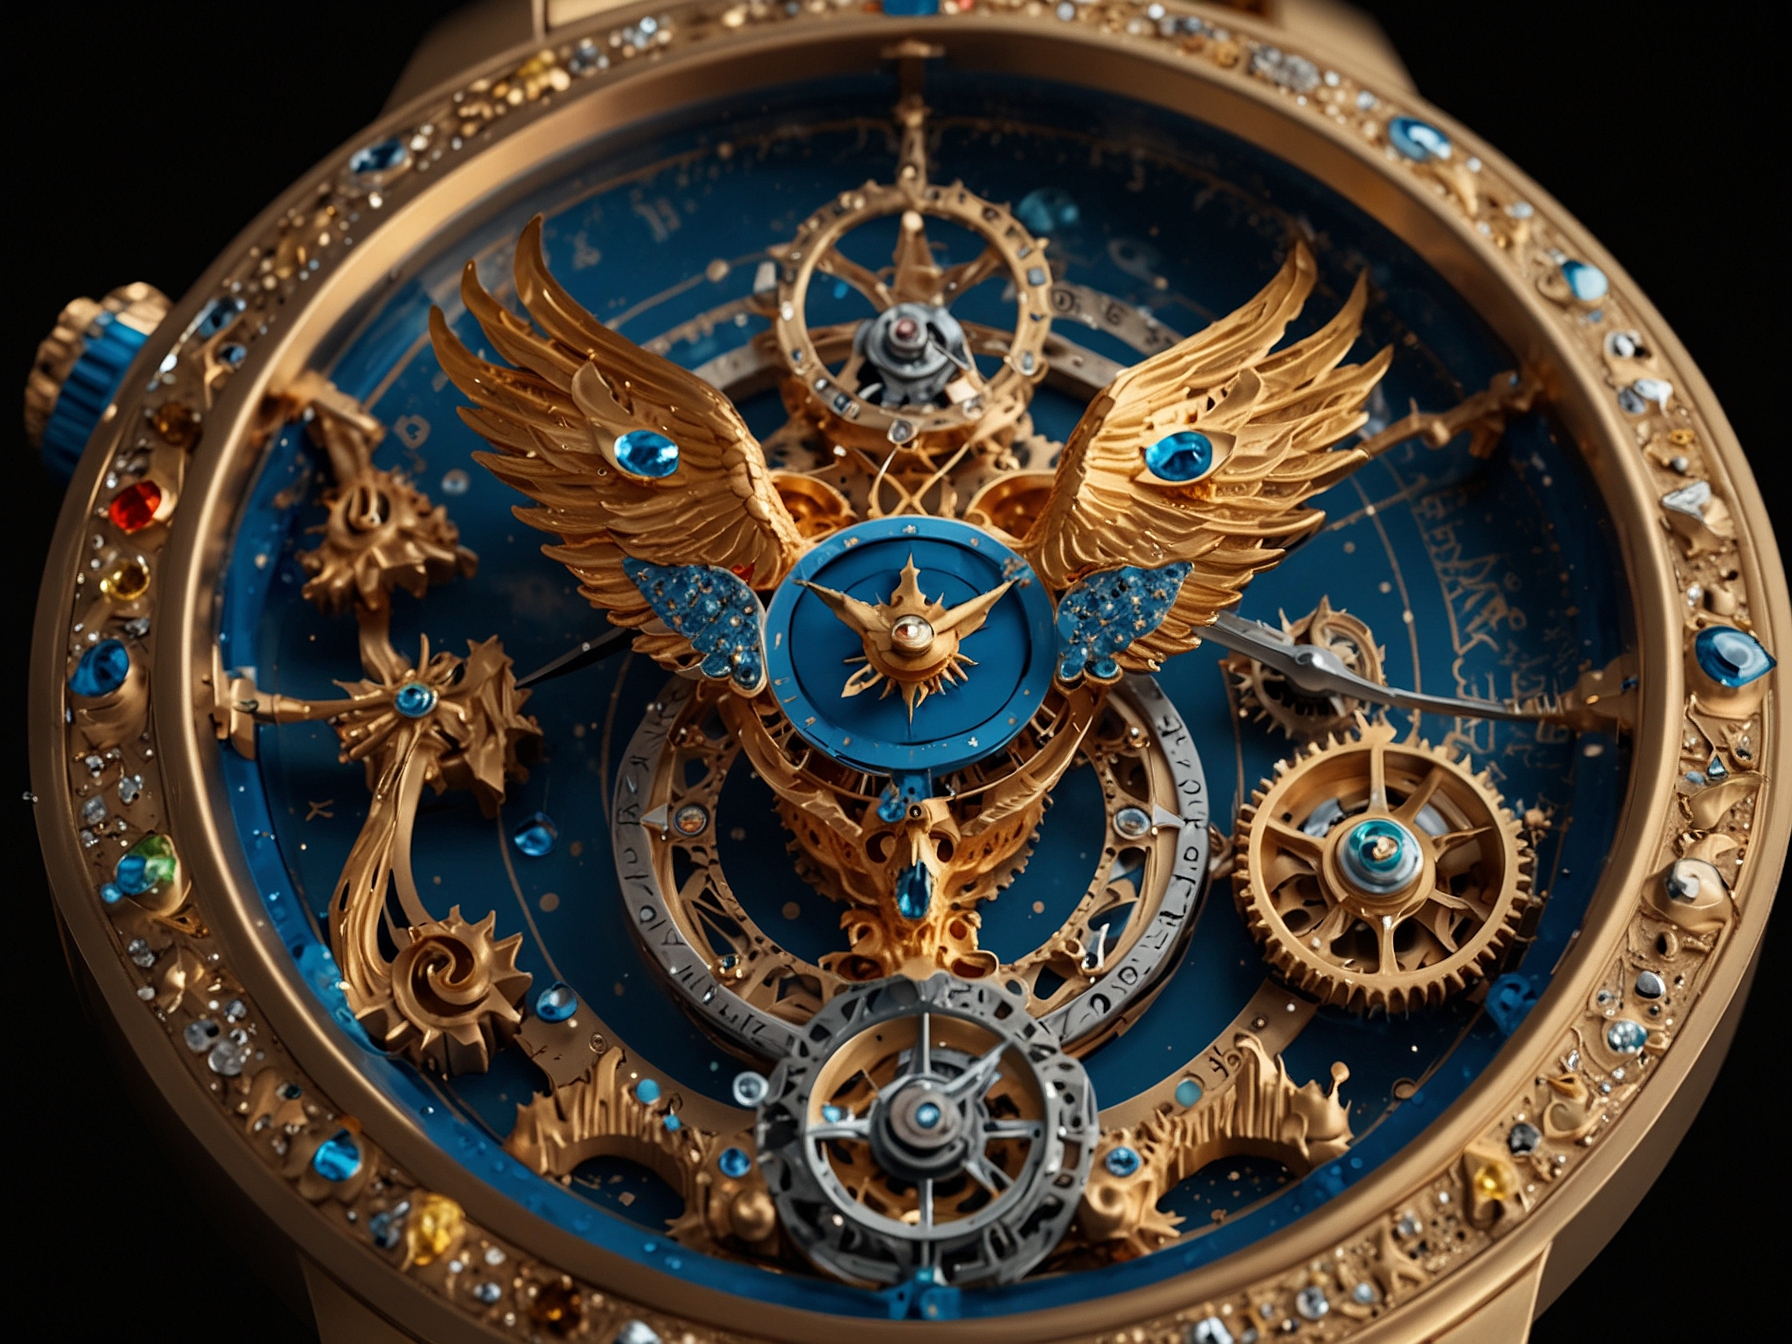 The Jacob & Co Astronomia Tourbillon Art Phoenix, featuring a multi-axis tourbillon, celestial display, rotating globe, and hand-painted phoenix, exemplifying the brand’s innovative and bold craftsmanship.